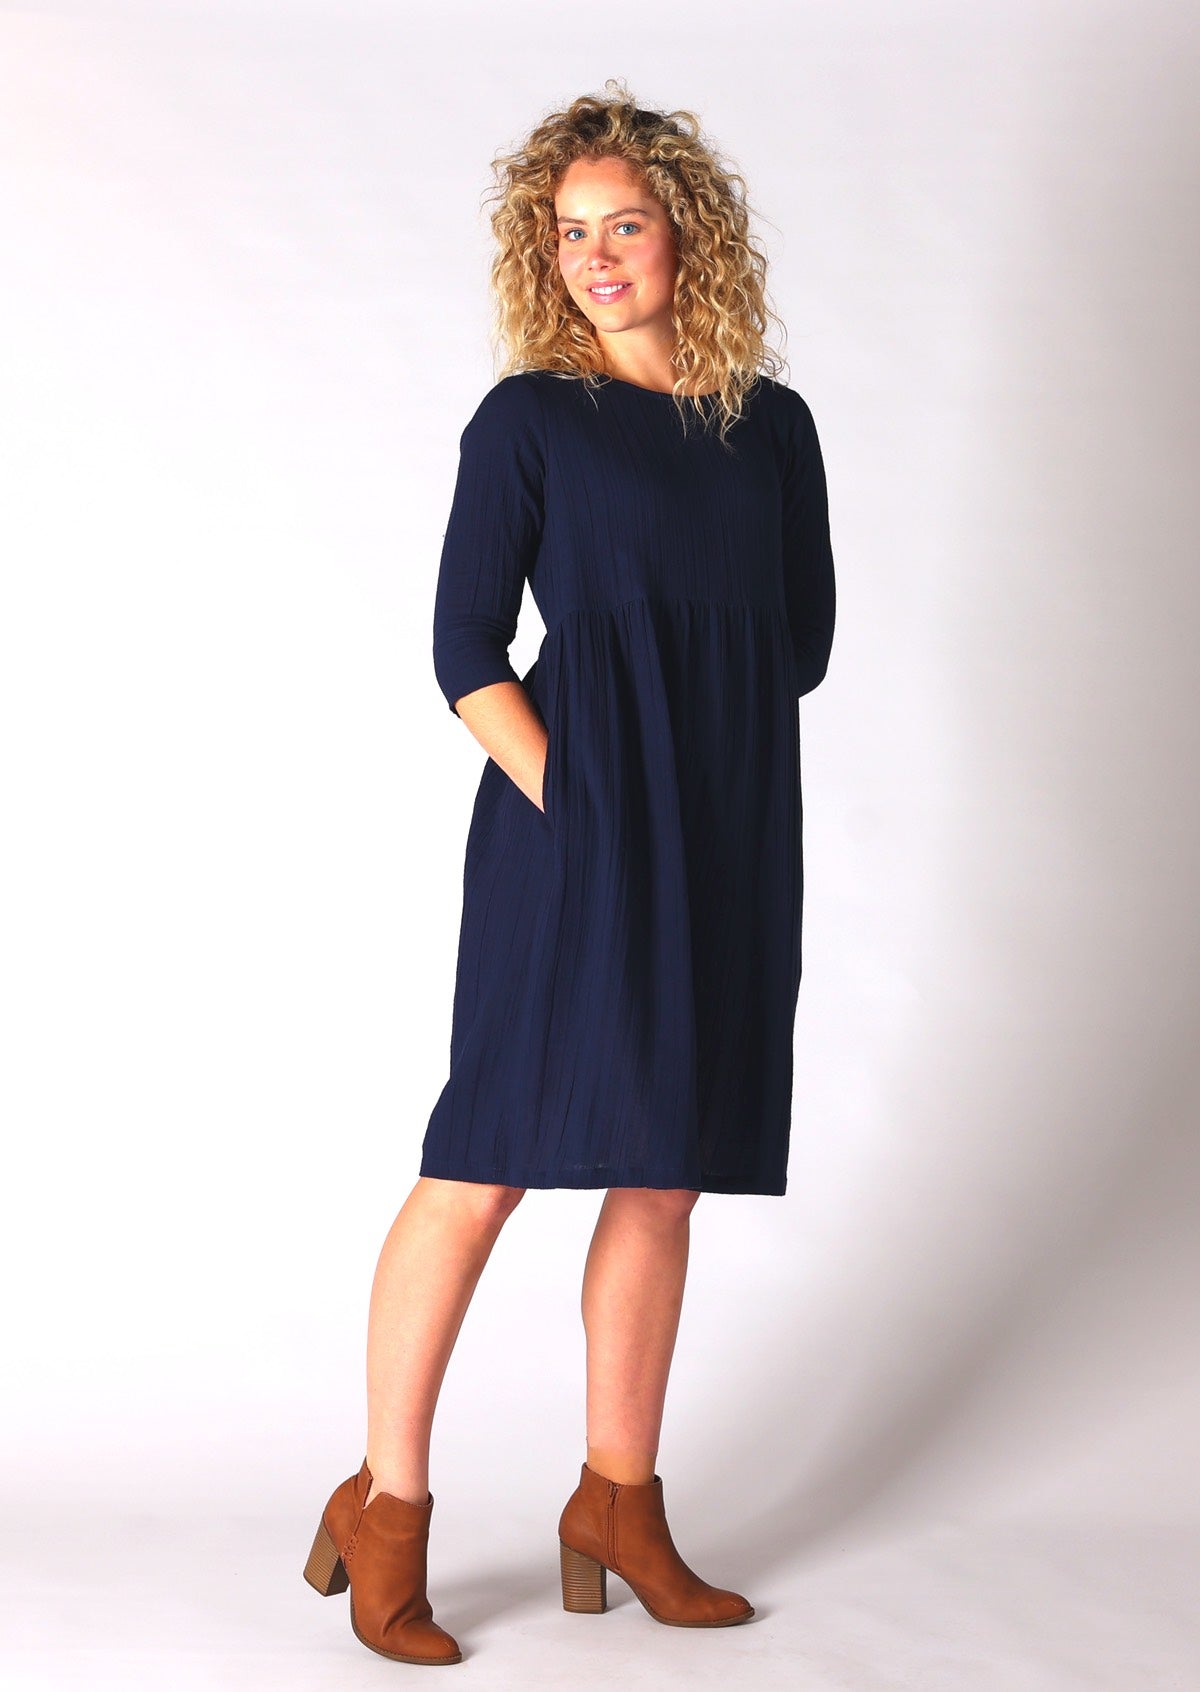 Super comfortable and stylish cotton gauze dress with hidden side pockets